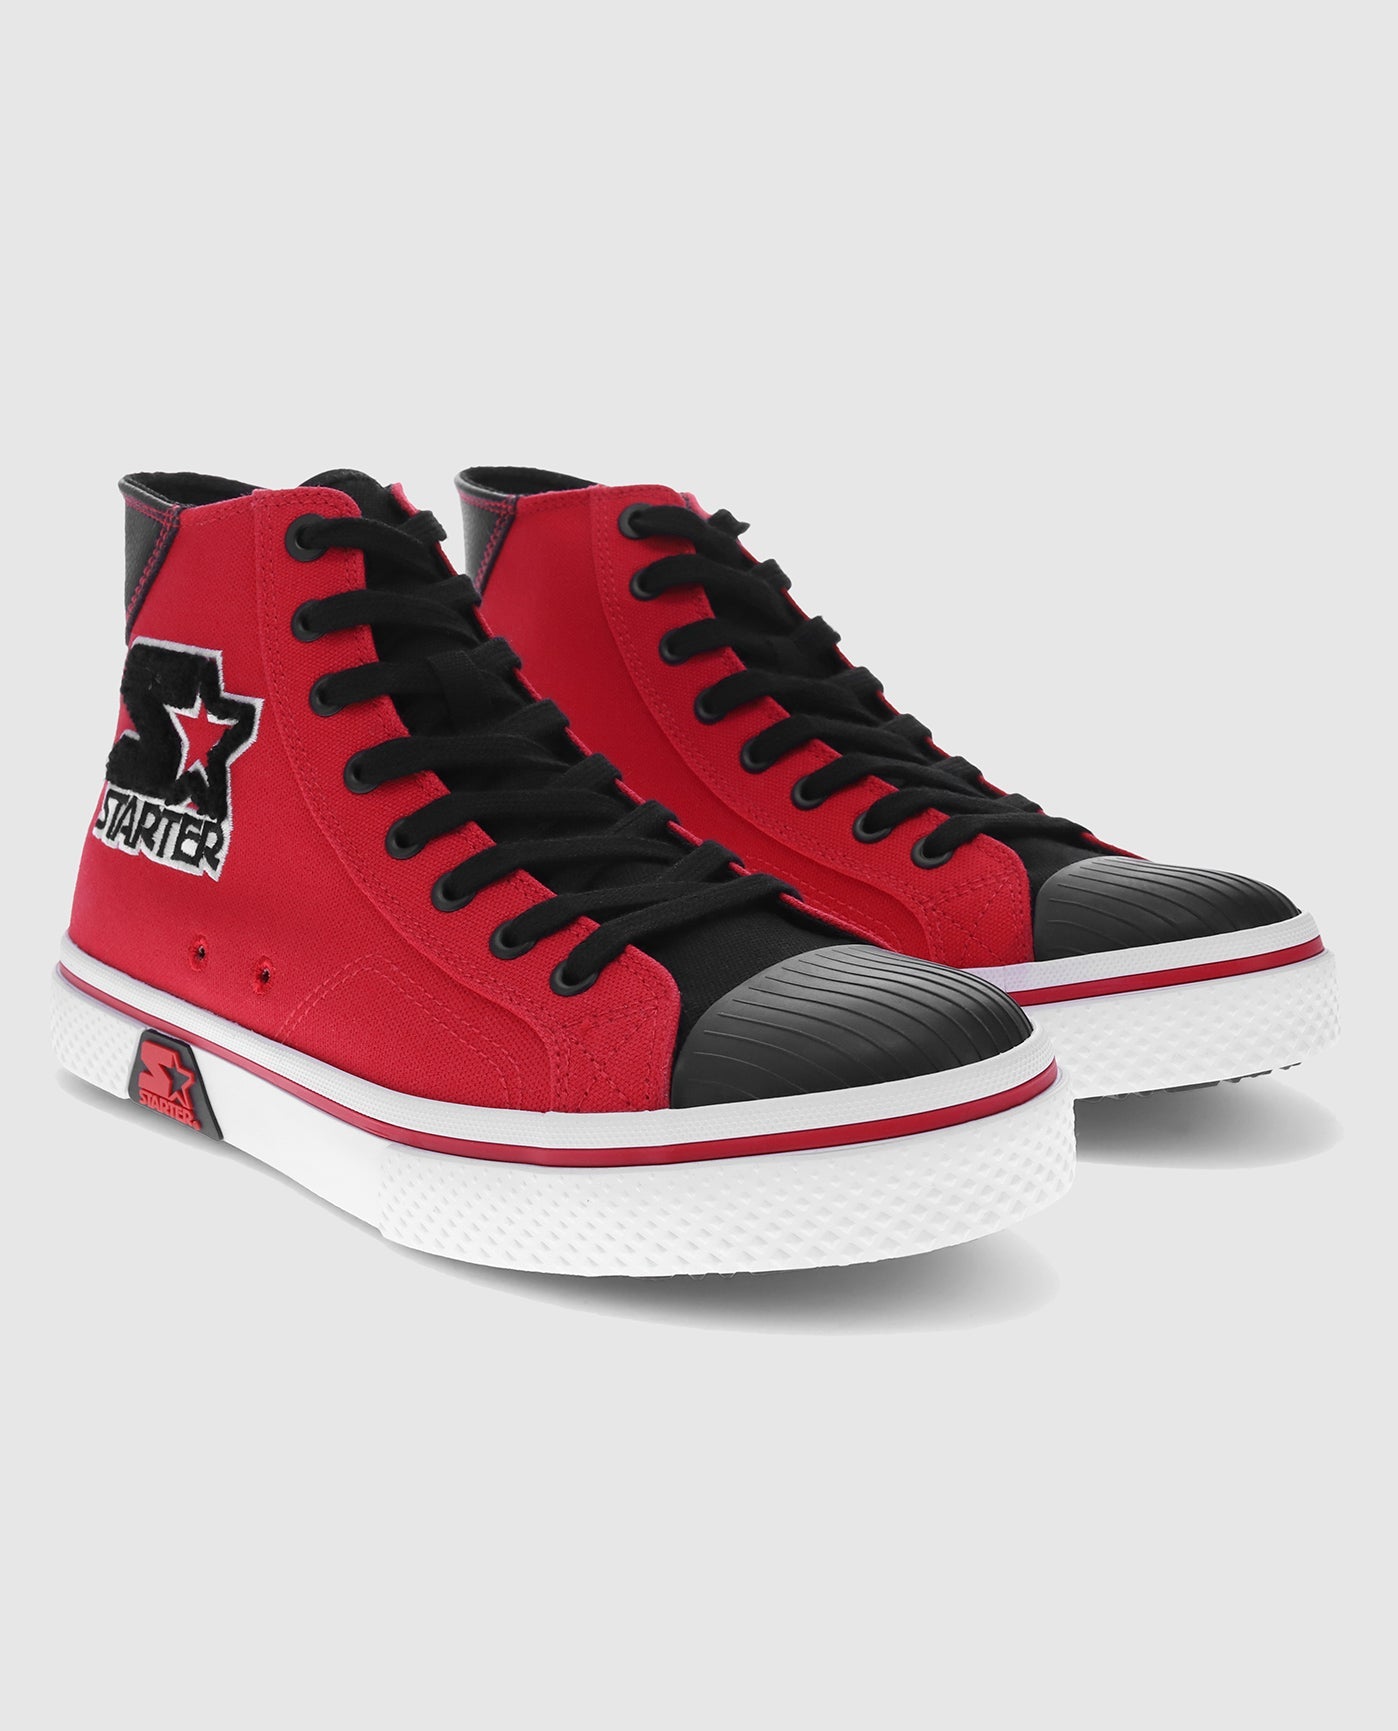 Front of Starter Tradition 71 High Red Sneaker Pair | Red